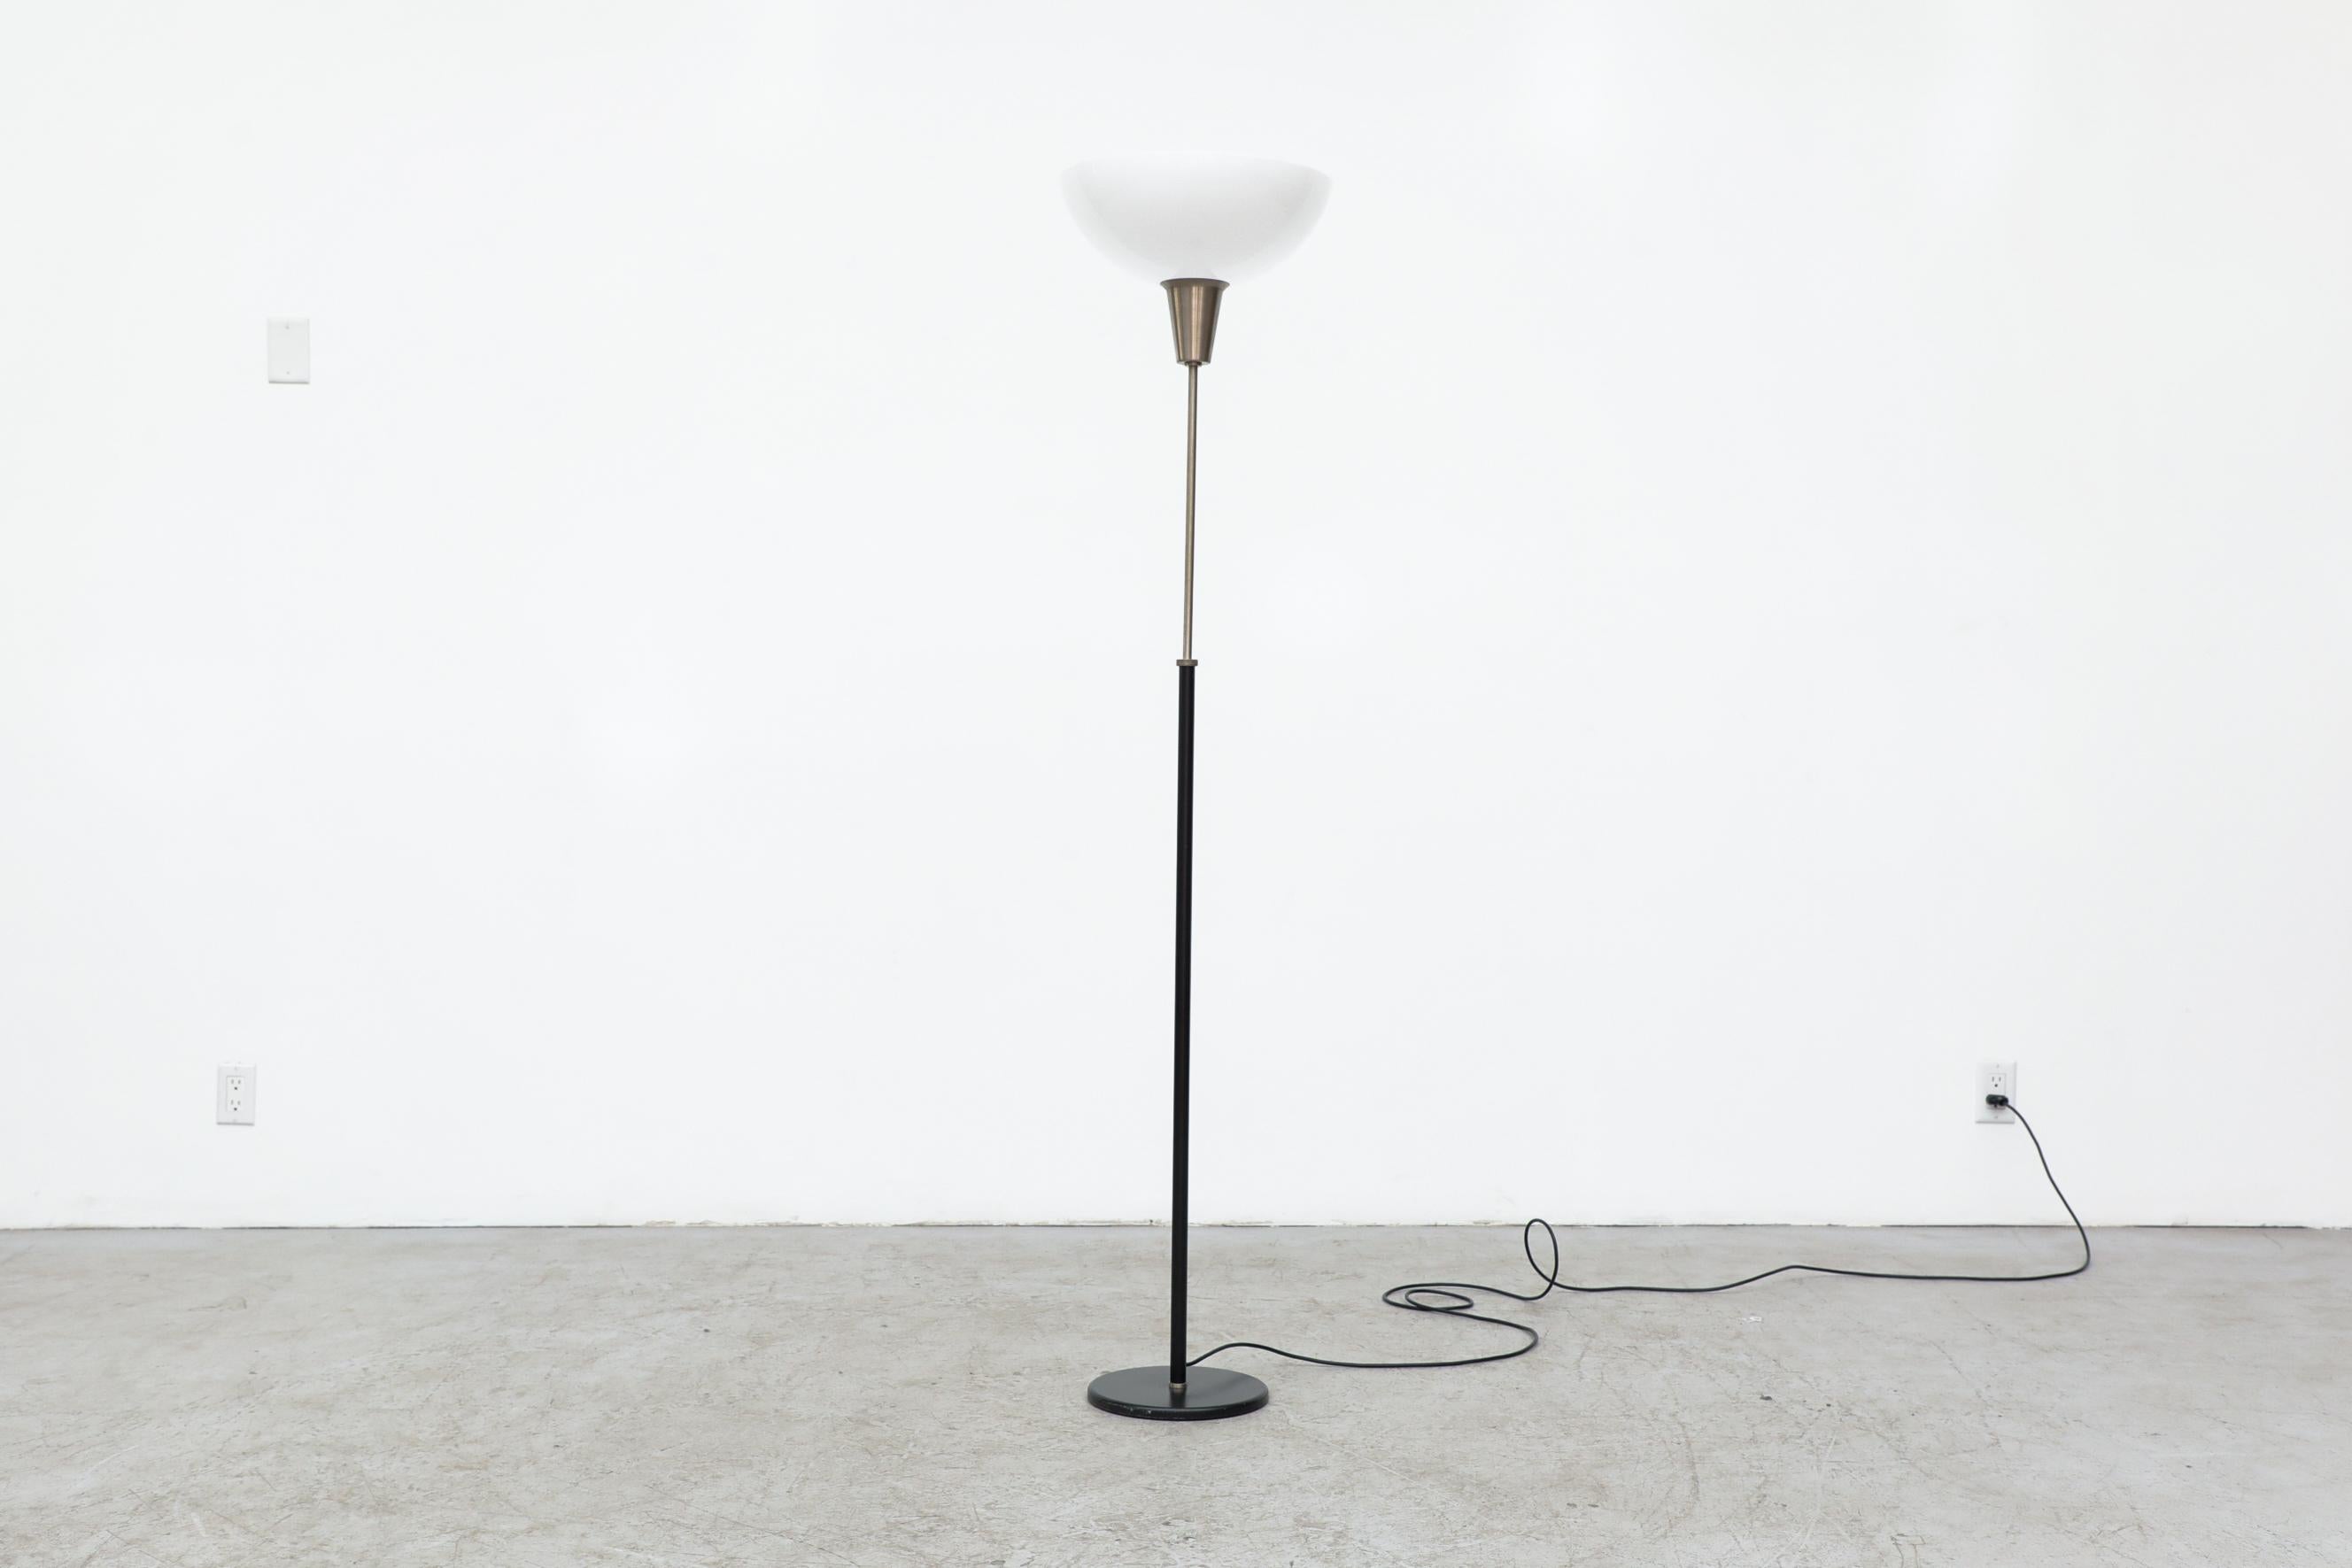 Midcentury floor lamp with white plexi shade and adjustable height stand. In original condition with visible wear, consistent with its age and use. Shade measures 14.75